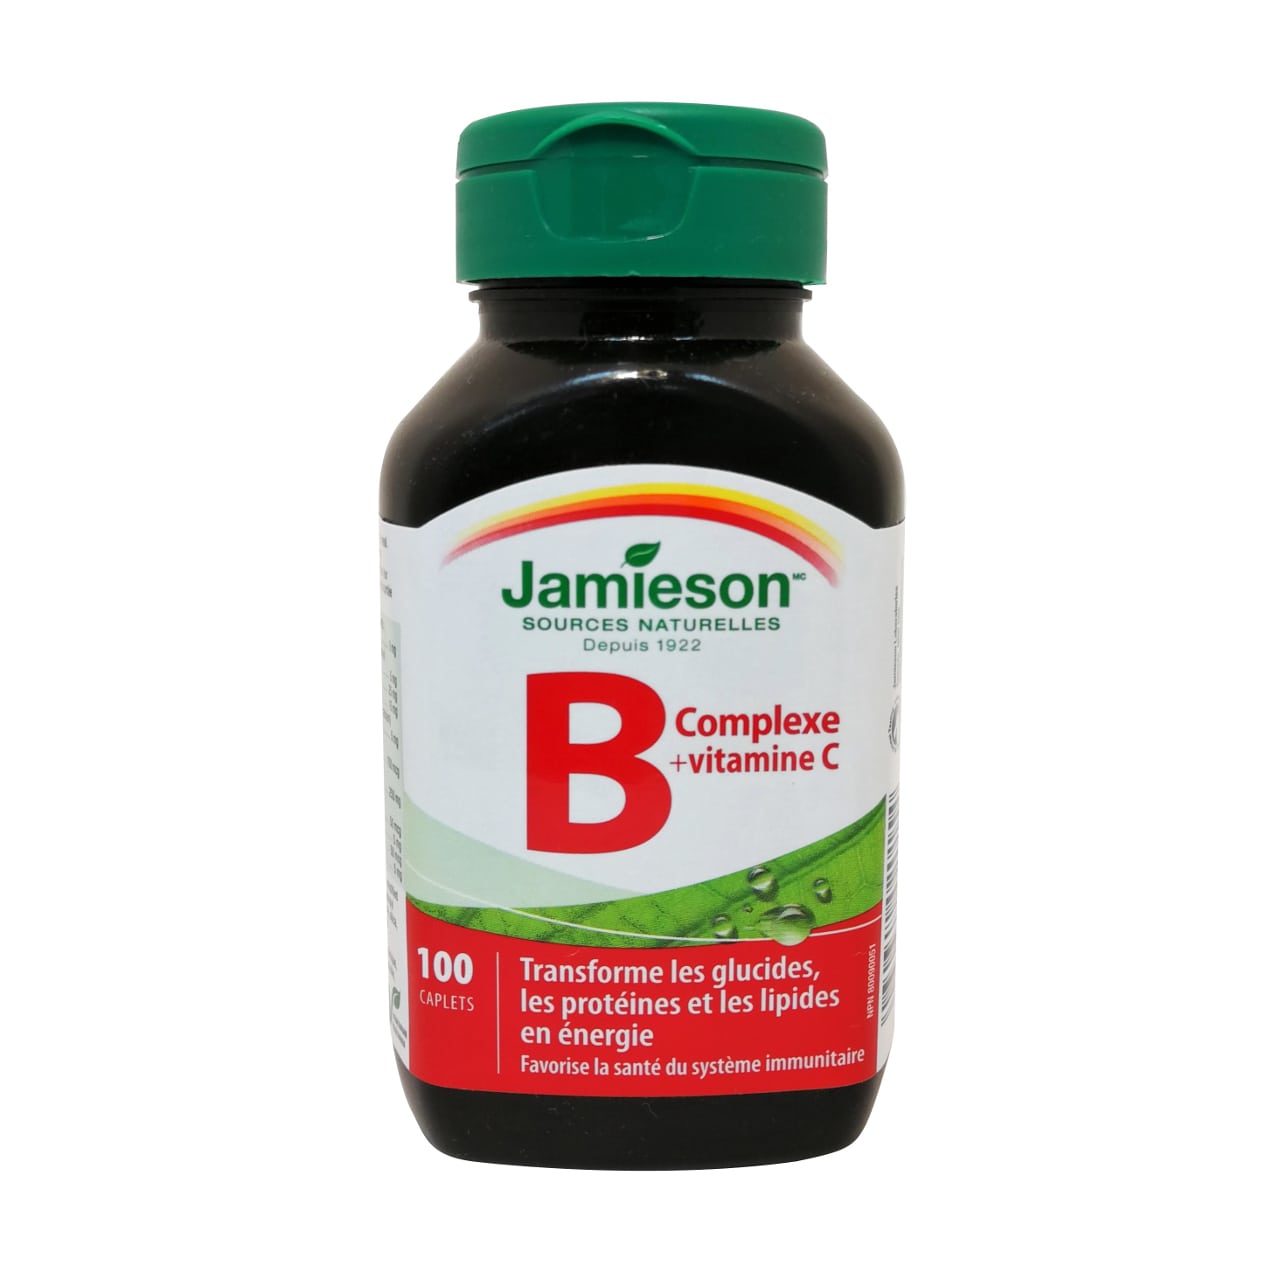 Product label for Jamieson B Complex + Vitamin C in French